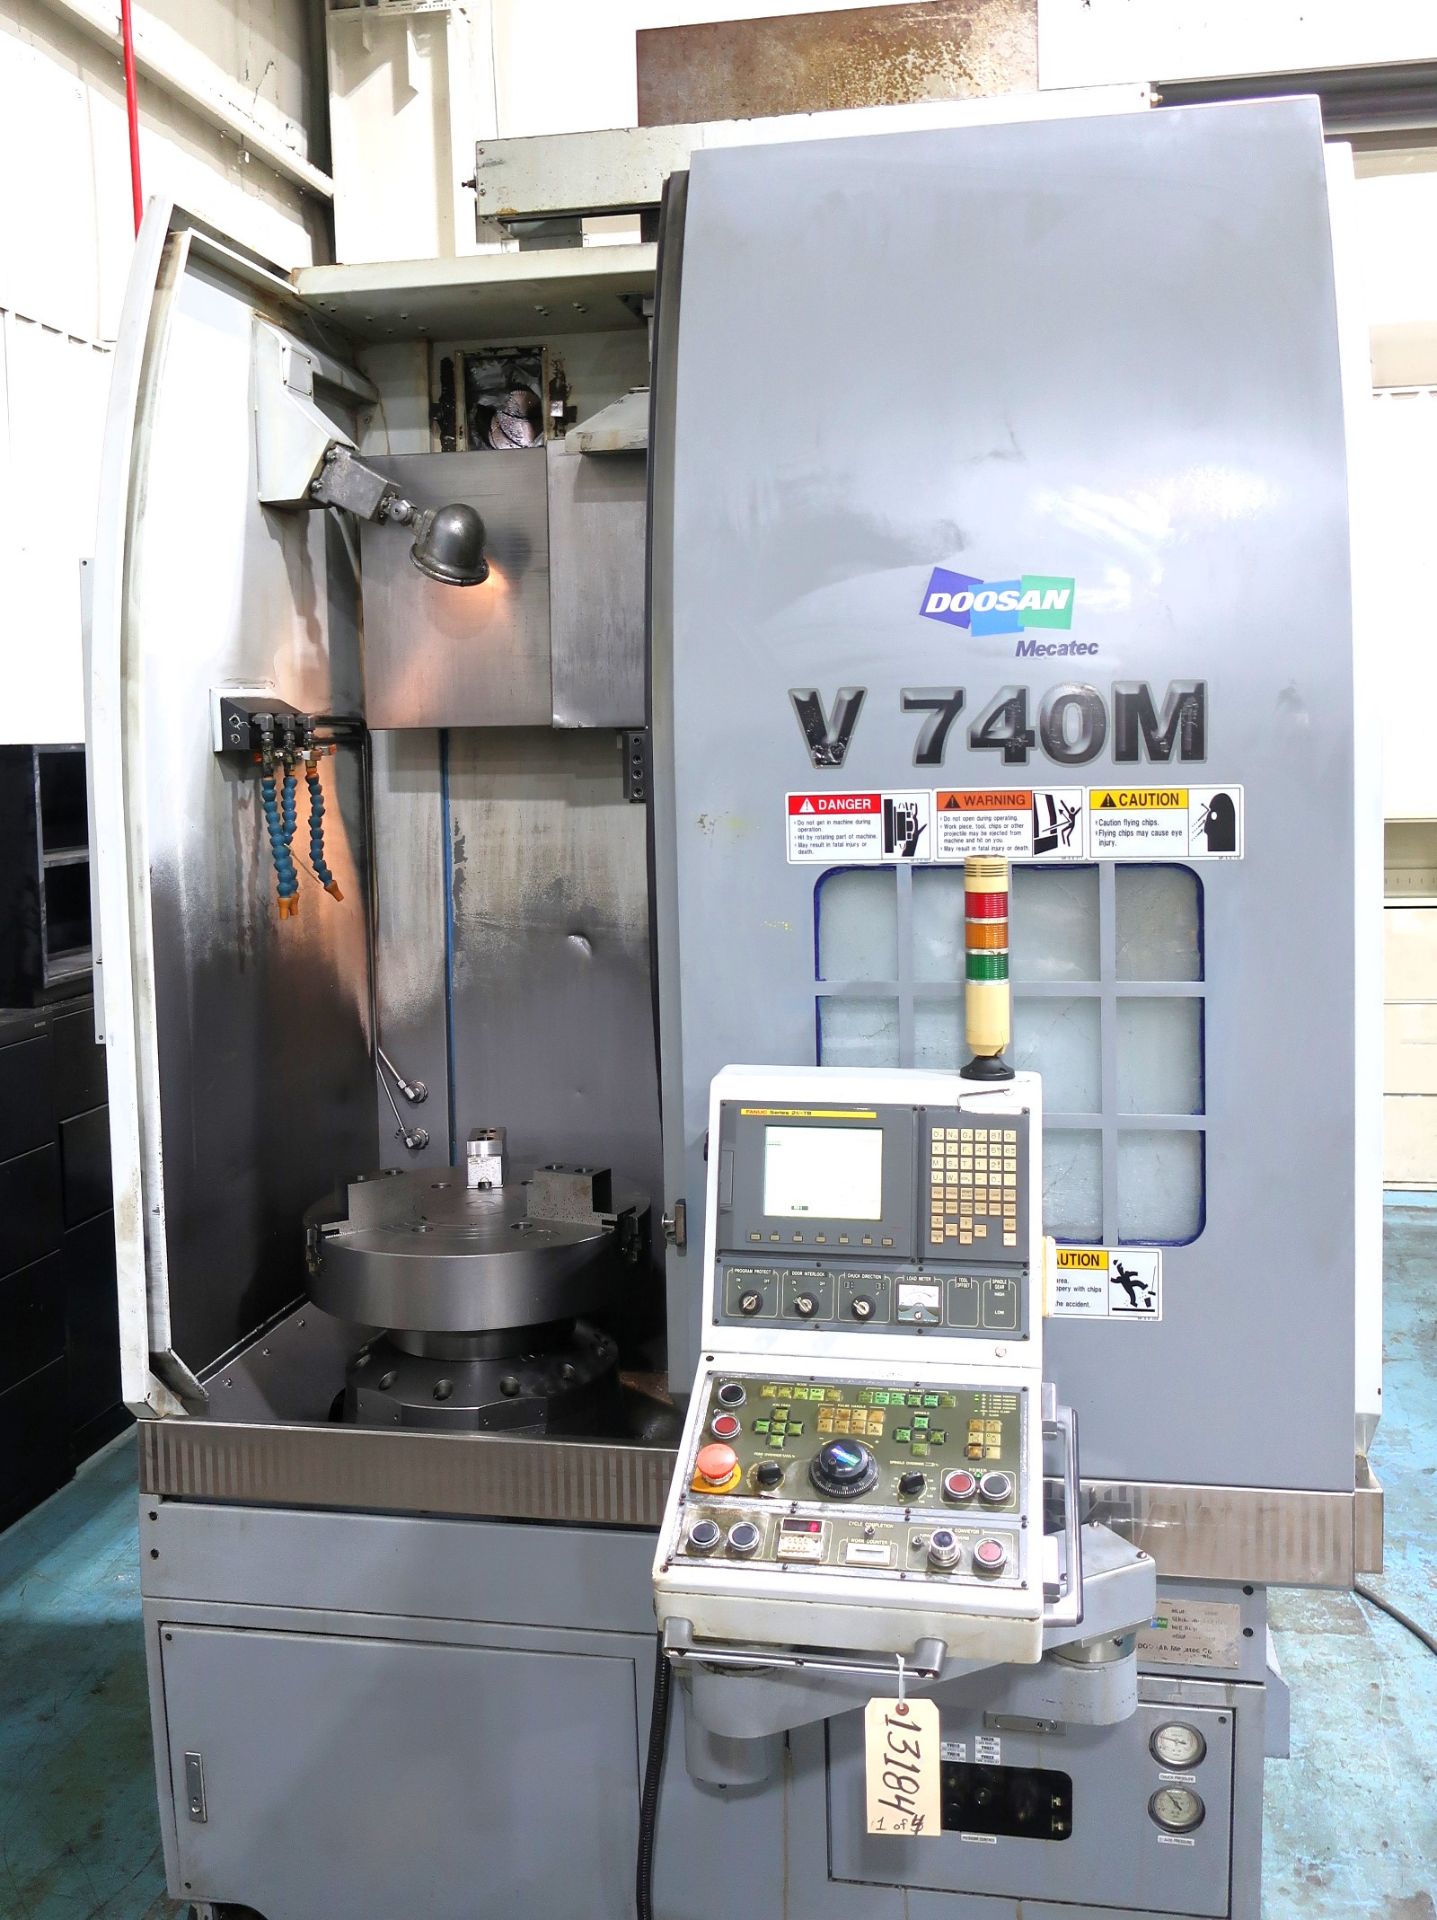 2006 24" Doosan V740M 3-Axis CNC Vertical Turning Center w/live tooling and C-axis, S/N 1013